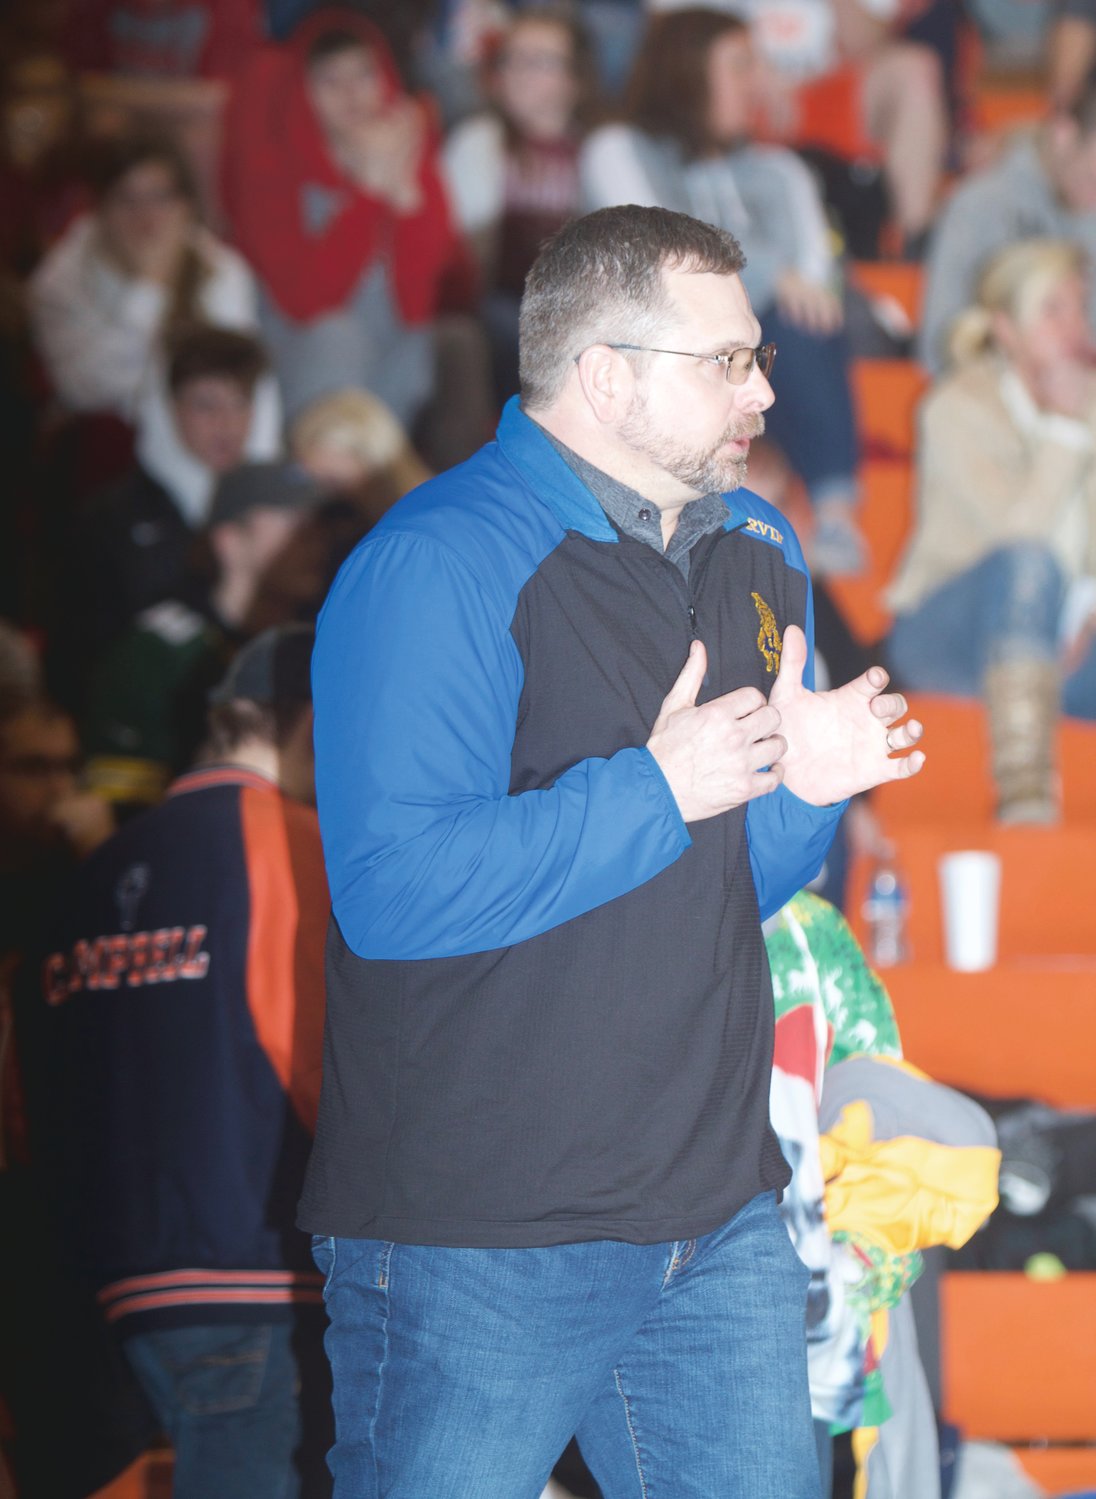 Crawfordsville wrestling coach Chris Ervin announced his retiring after 25 years at the helm of the Athenian program.